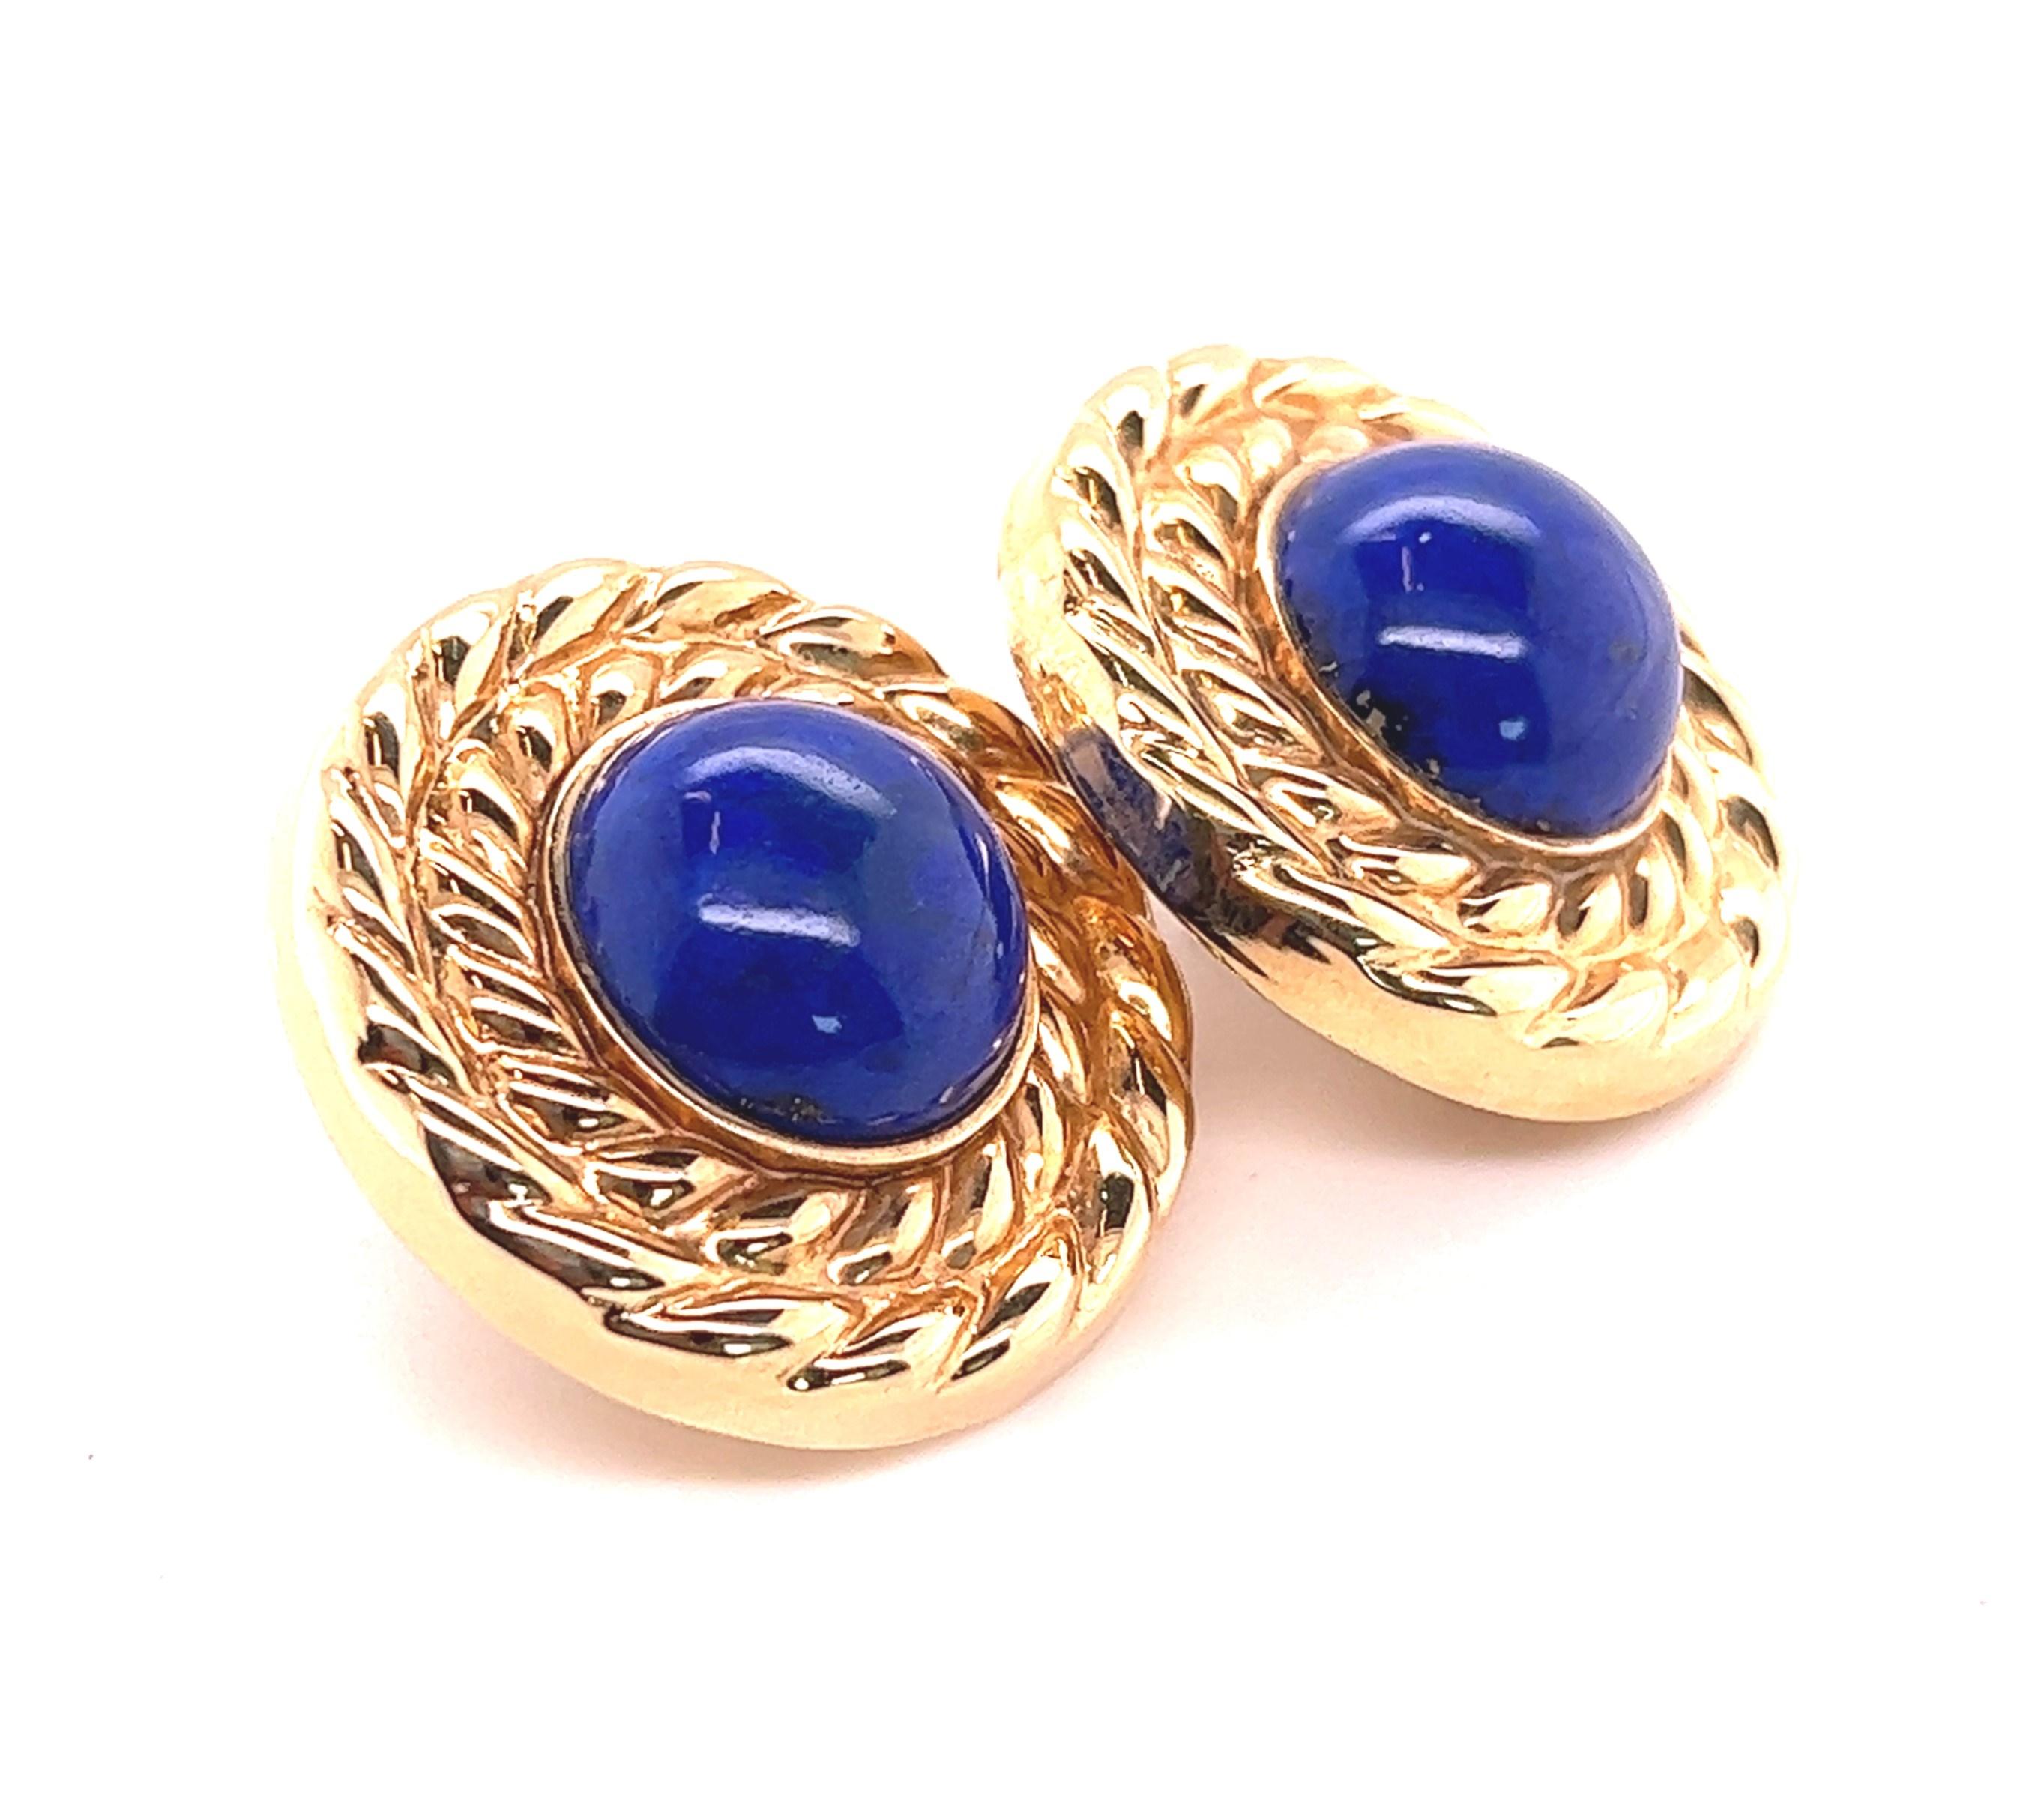 There's something about lapis lazuli. it's ancient and modern all at the same time. There's nothing else like the color. That's why it's been prized for centuries. 

These earrings are statement earrings. They measure 1 1/8 inch in diameter. The